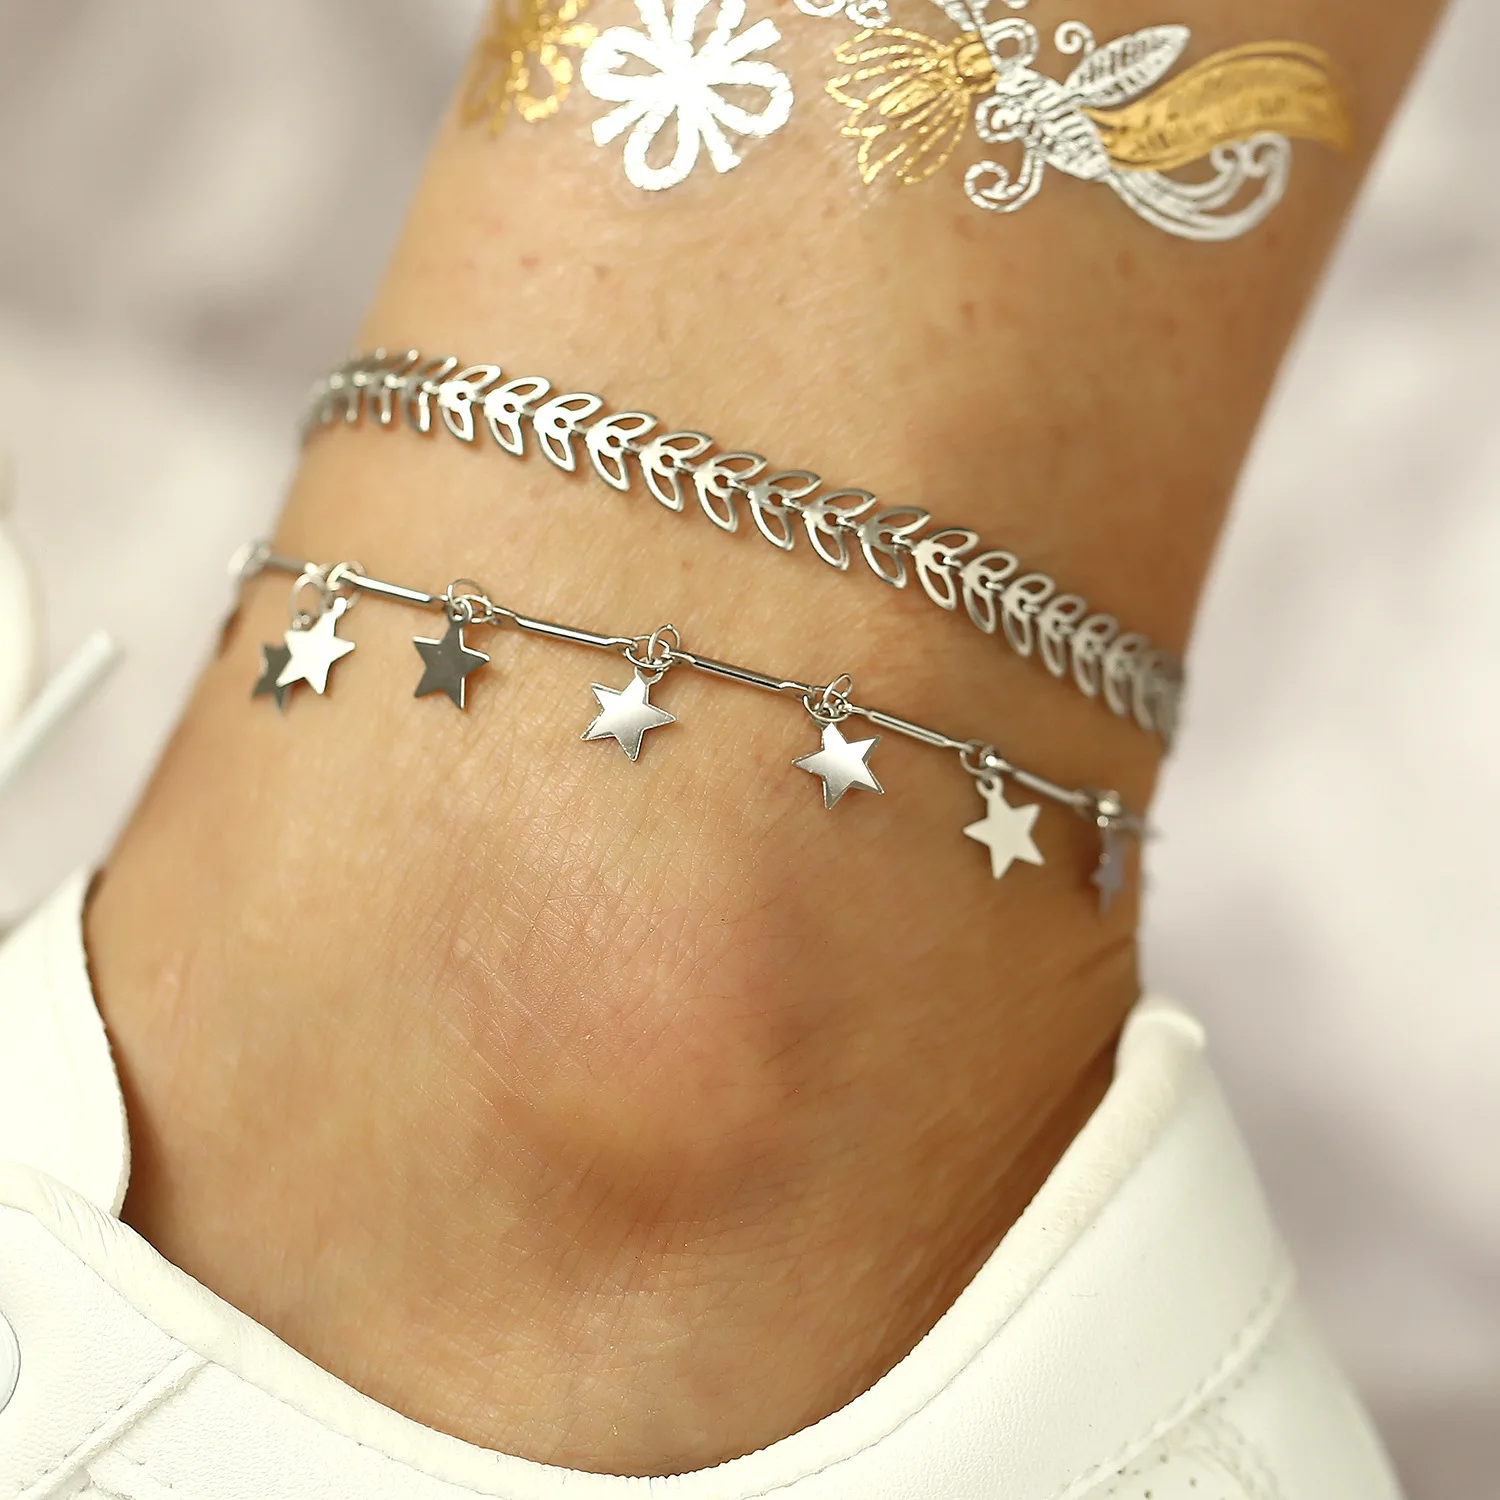 

New Foot Chain Anklets Creative Leaves Star Pendant Footchain Bohemian Beach Layered Silver Anklet Bracelet for Women Jewelry